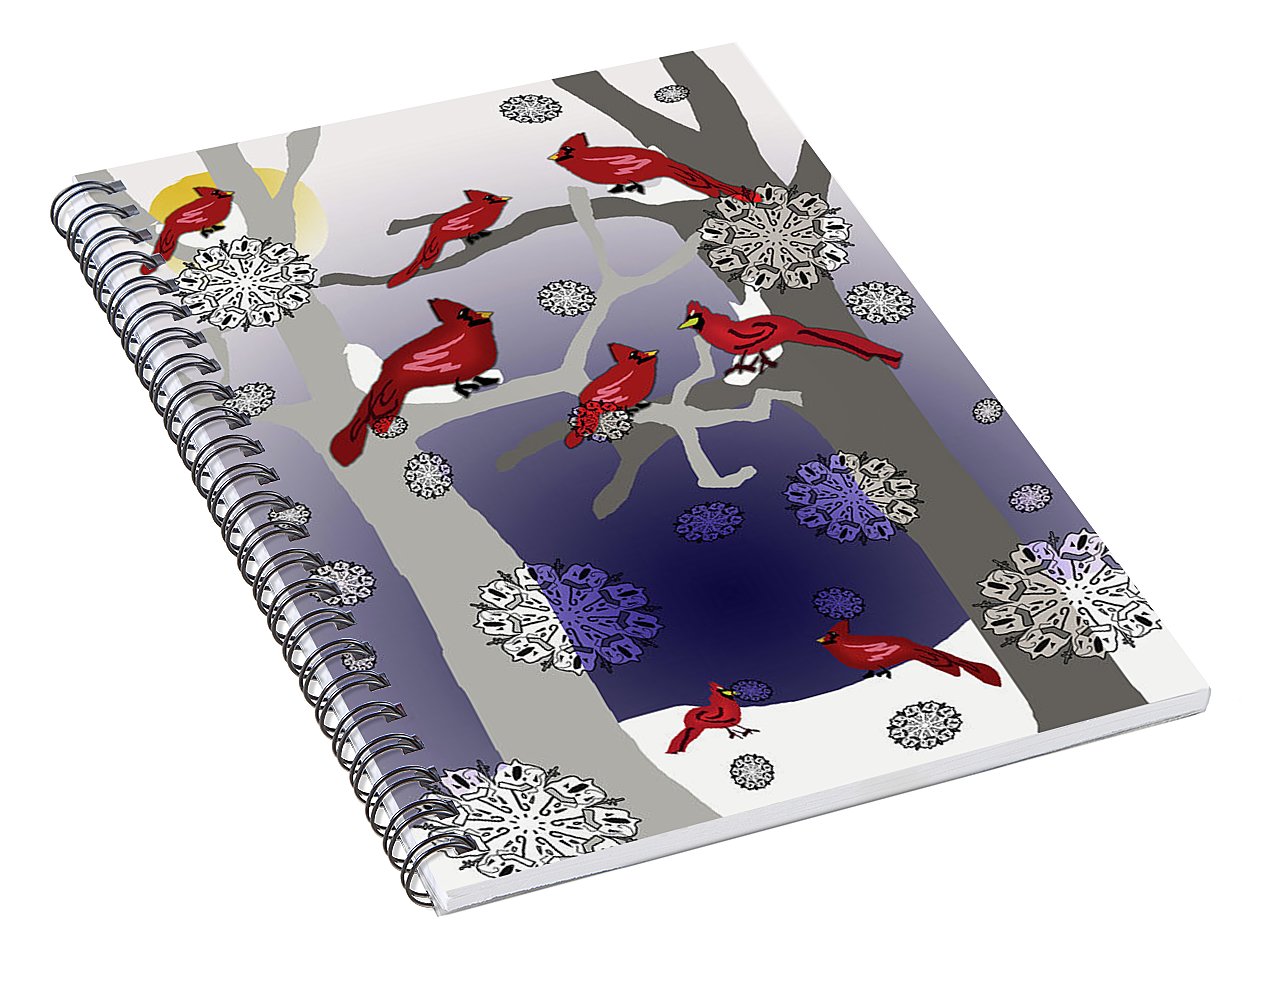 Cardinals In The Snow - Spiral Notebook